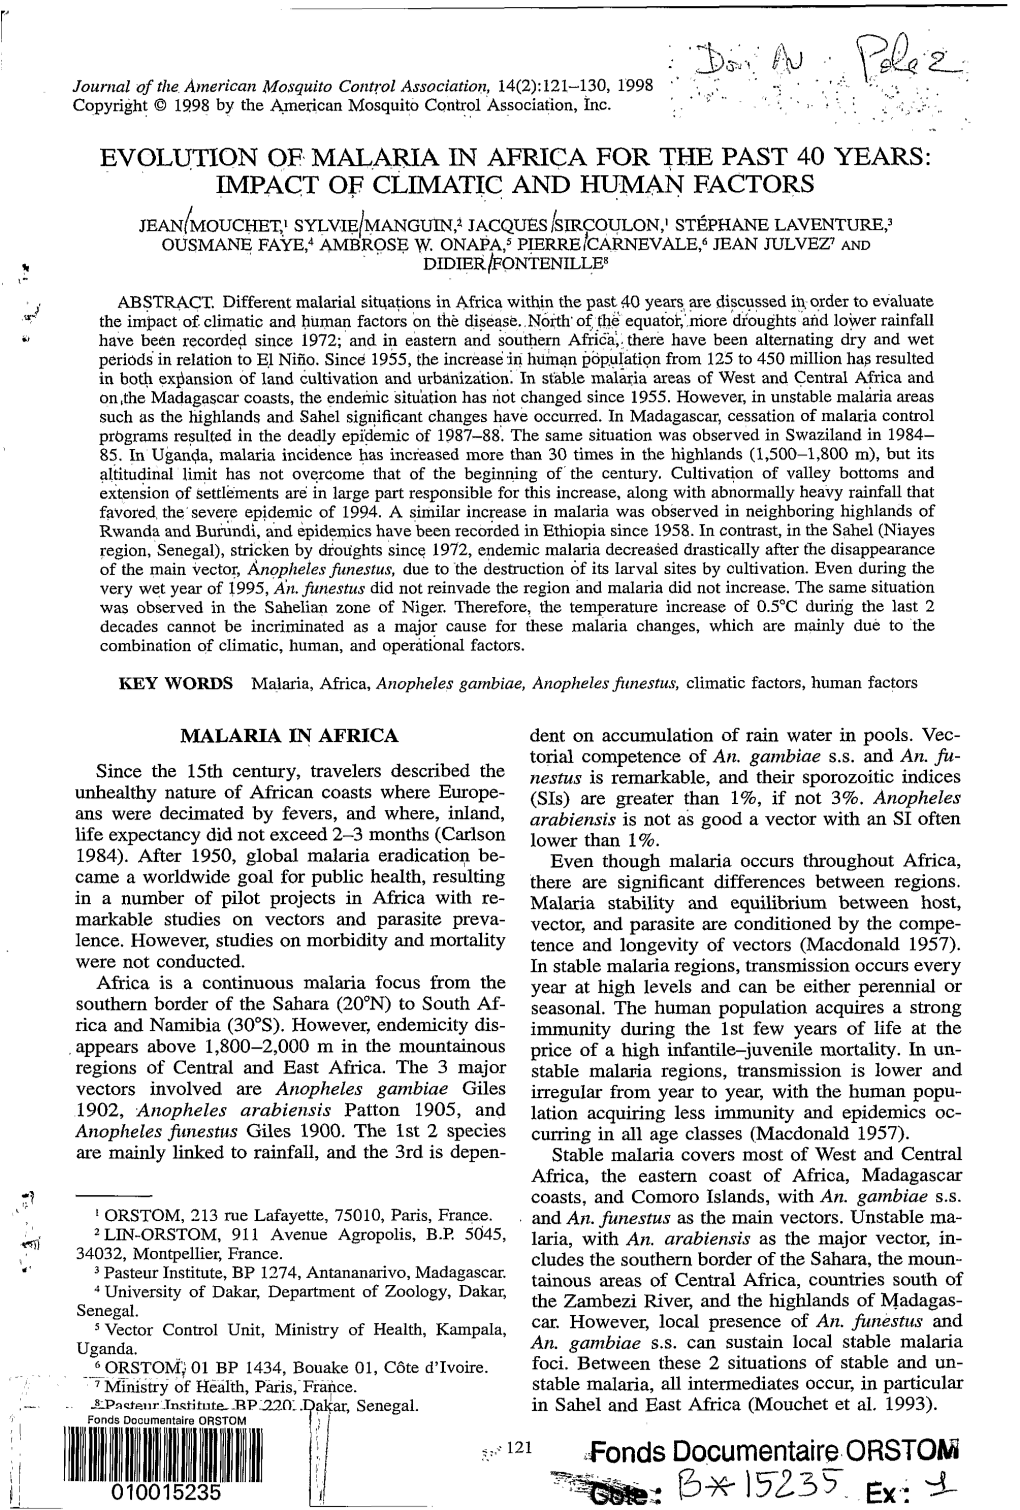 Evolution of Malaria in Africa for the Past 40 Years : Impact of Climatic